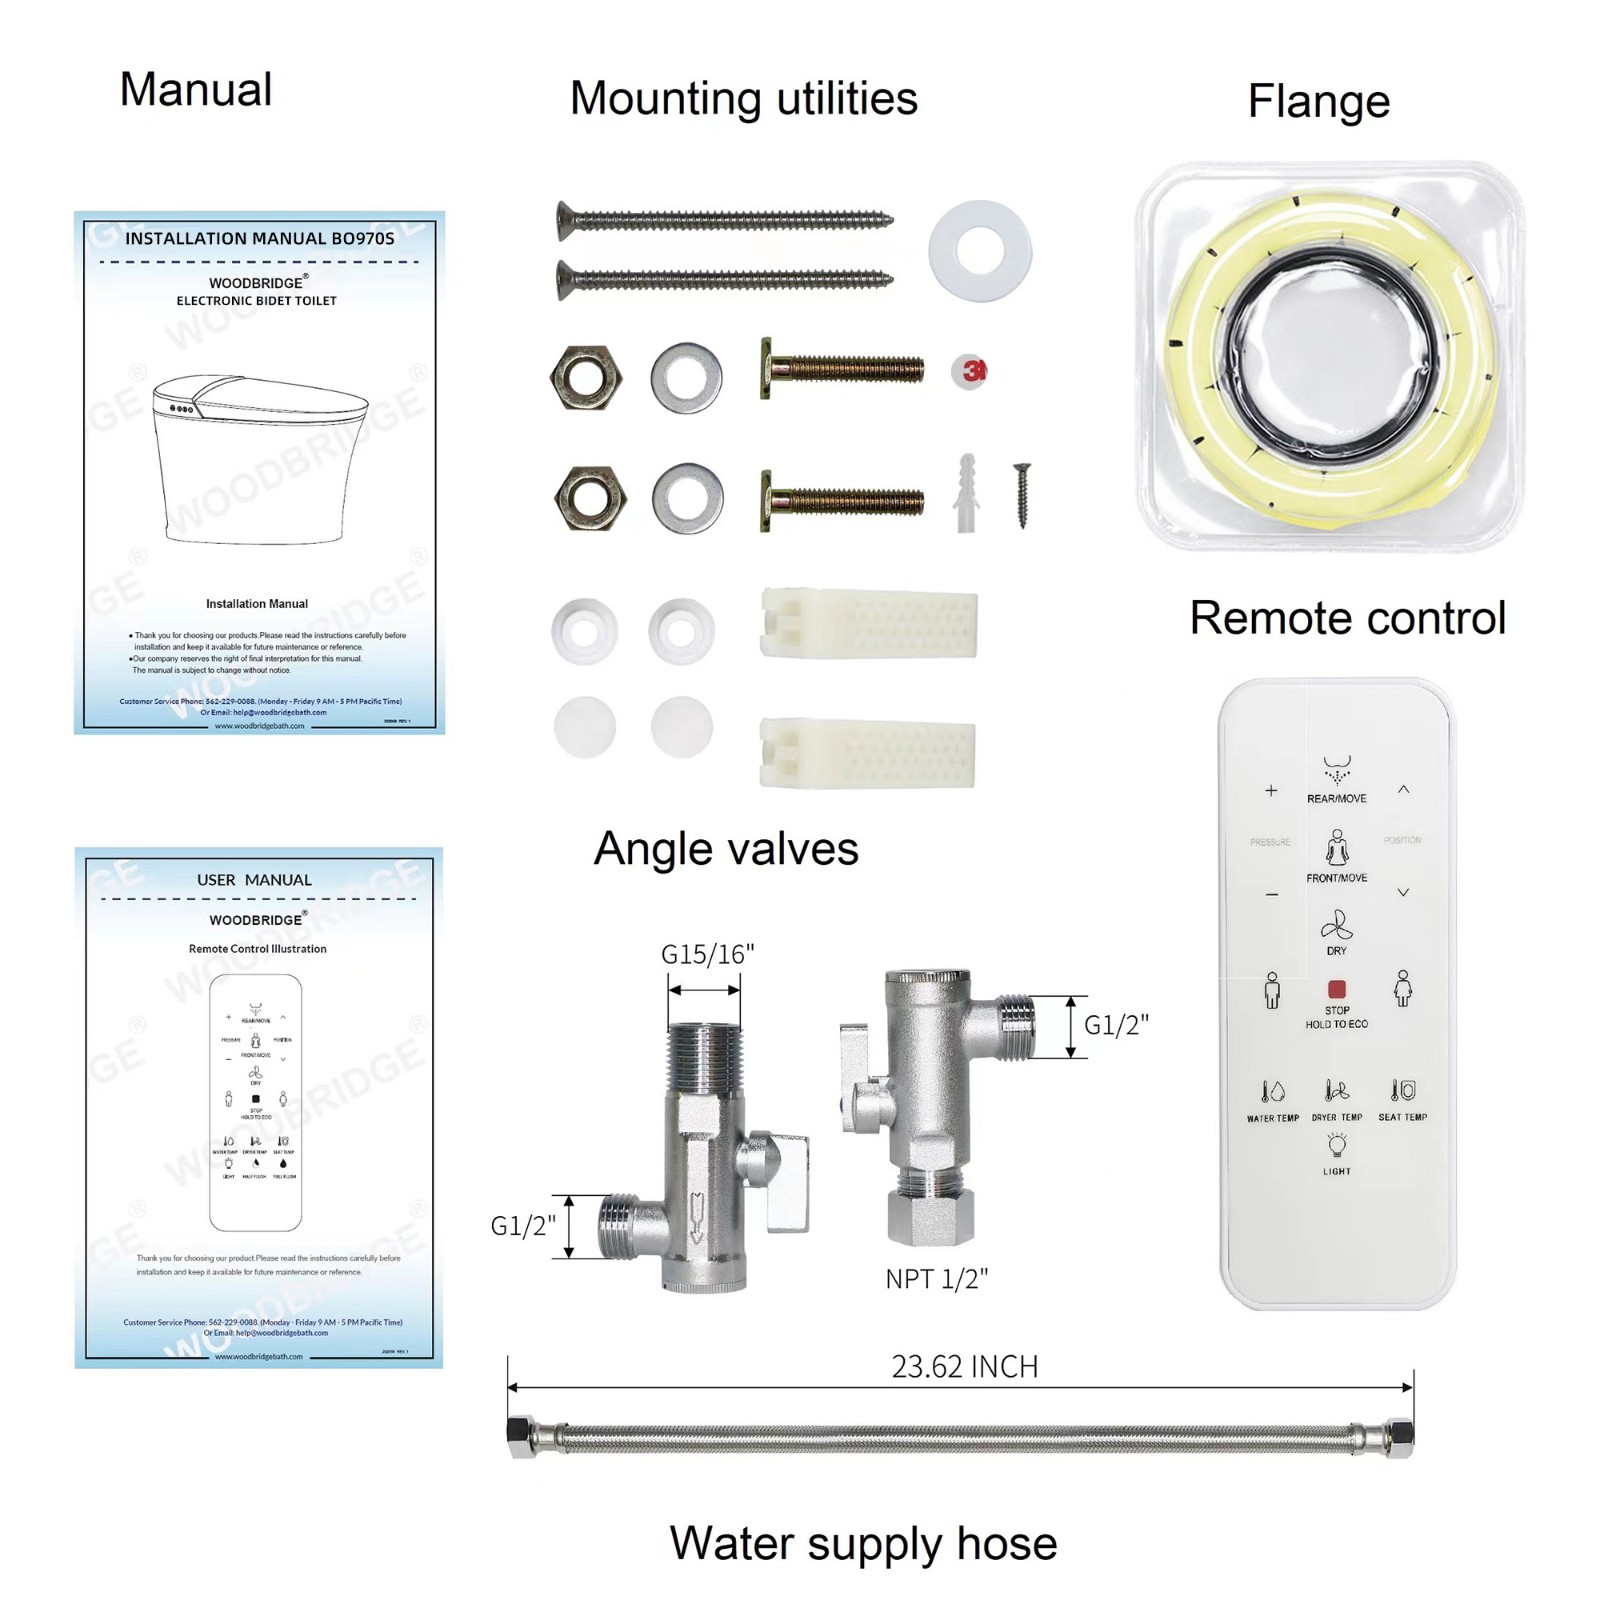  WOODBRIDGE B0970S-1.0(no foot sensor) Smart Bidet Toilet Elongated One Piece Modern Design, Heated Seat with Integrated Multi Function Remote Control, White_8448